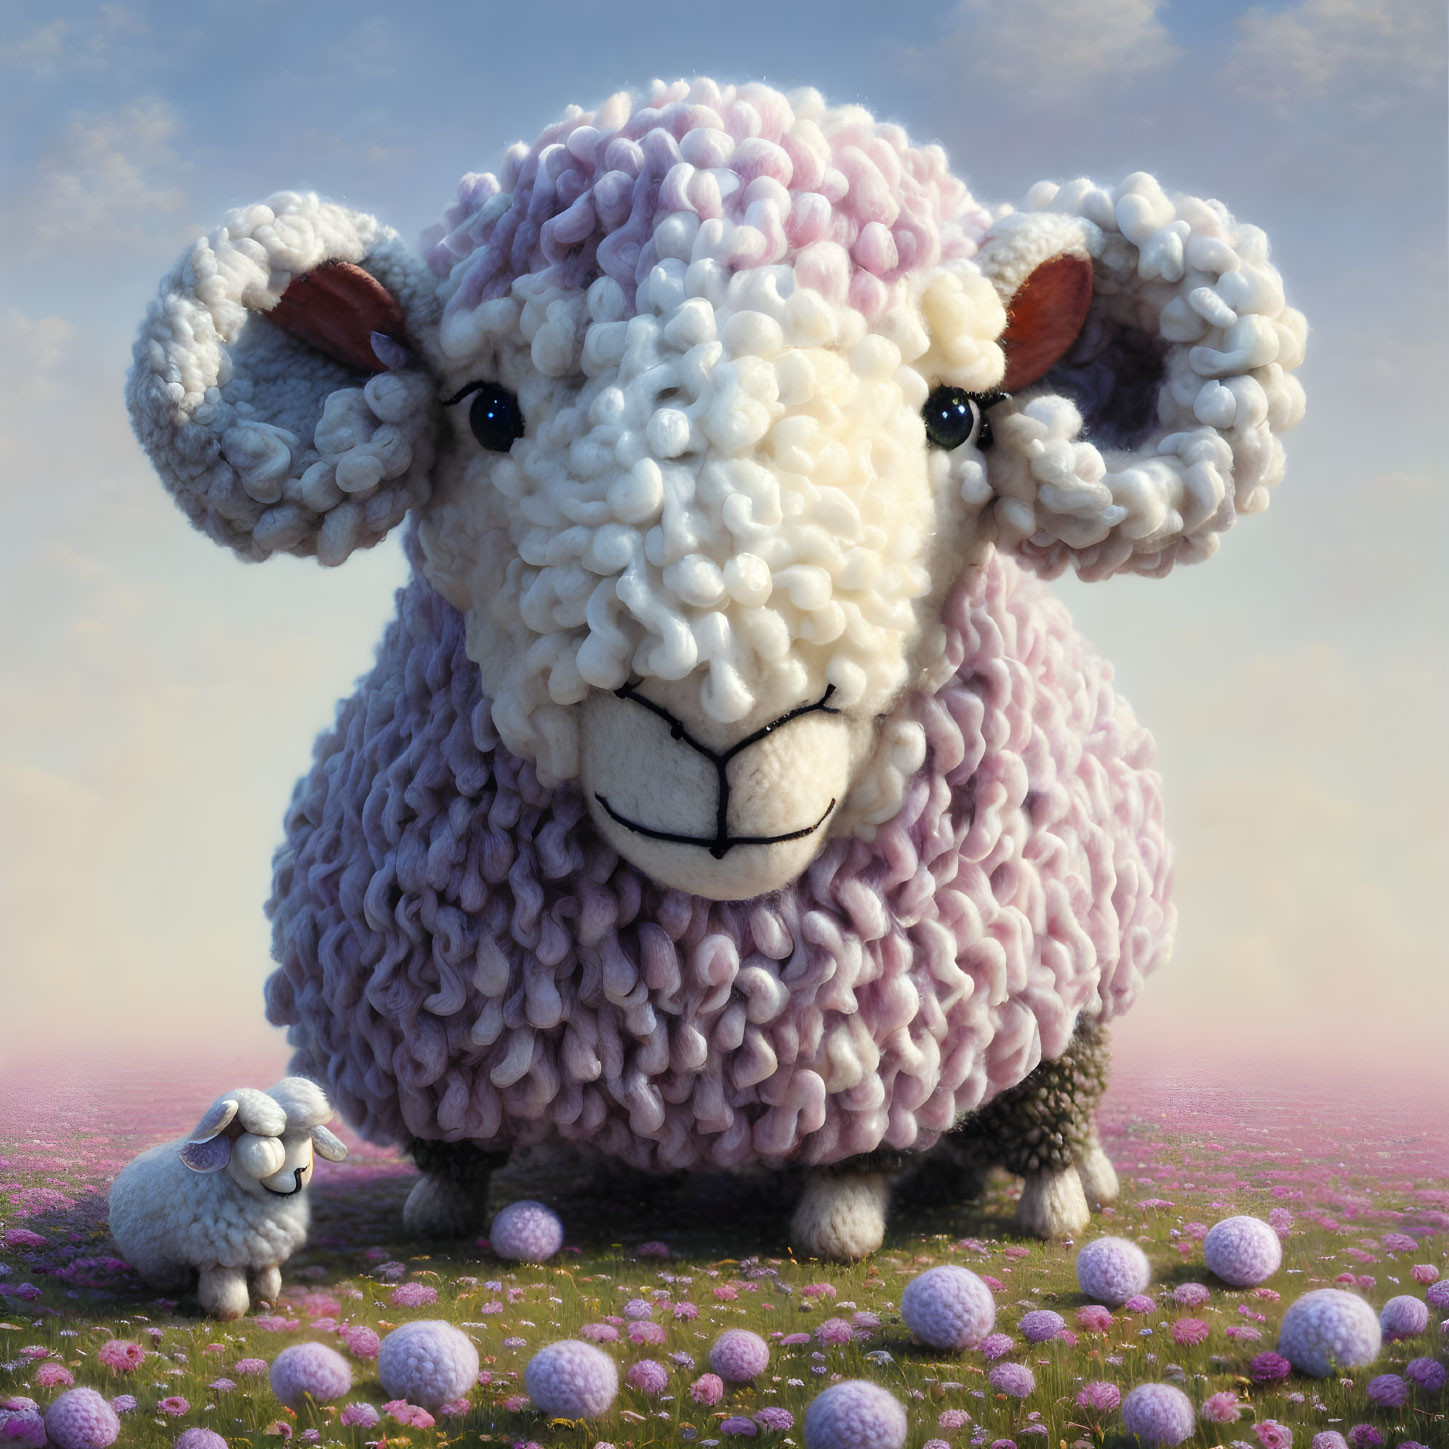 Illustration of oversized pink sheep in pink flower field